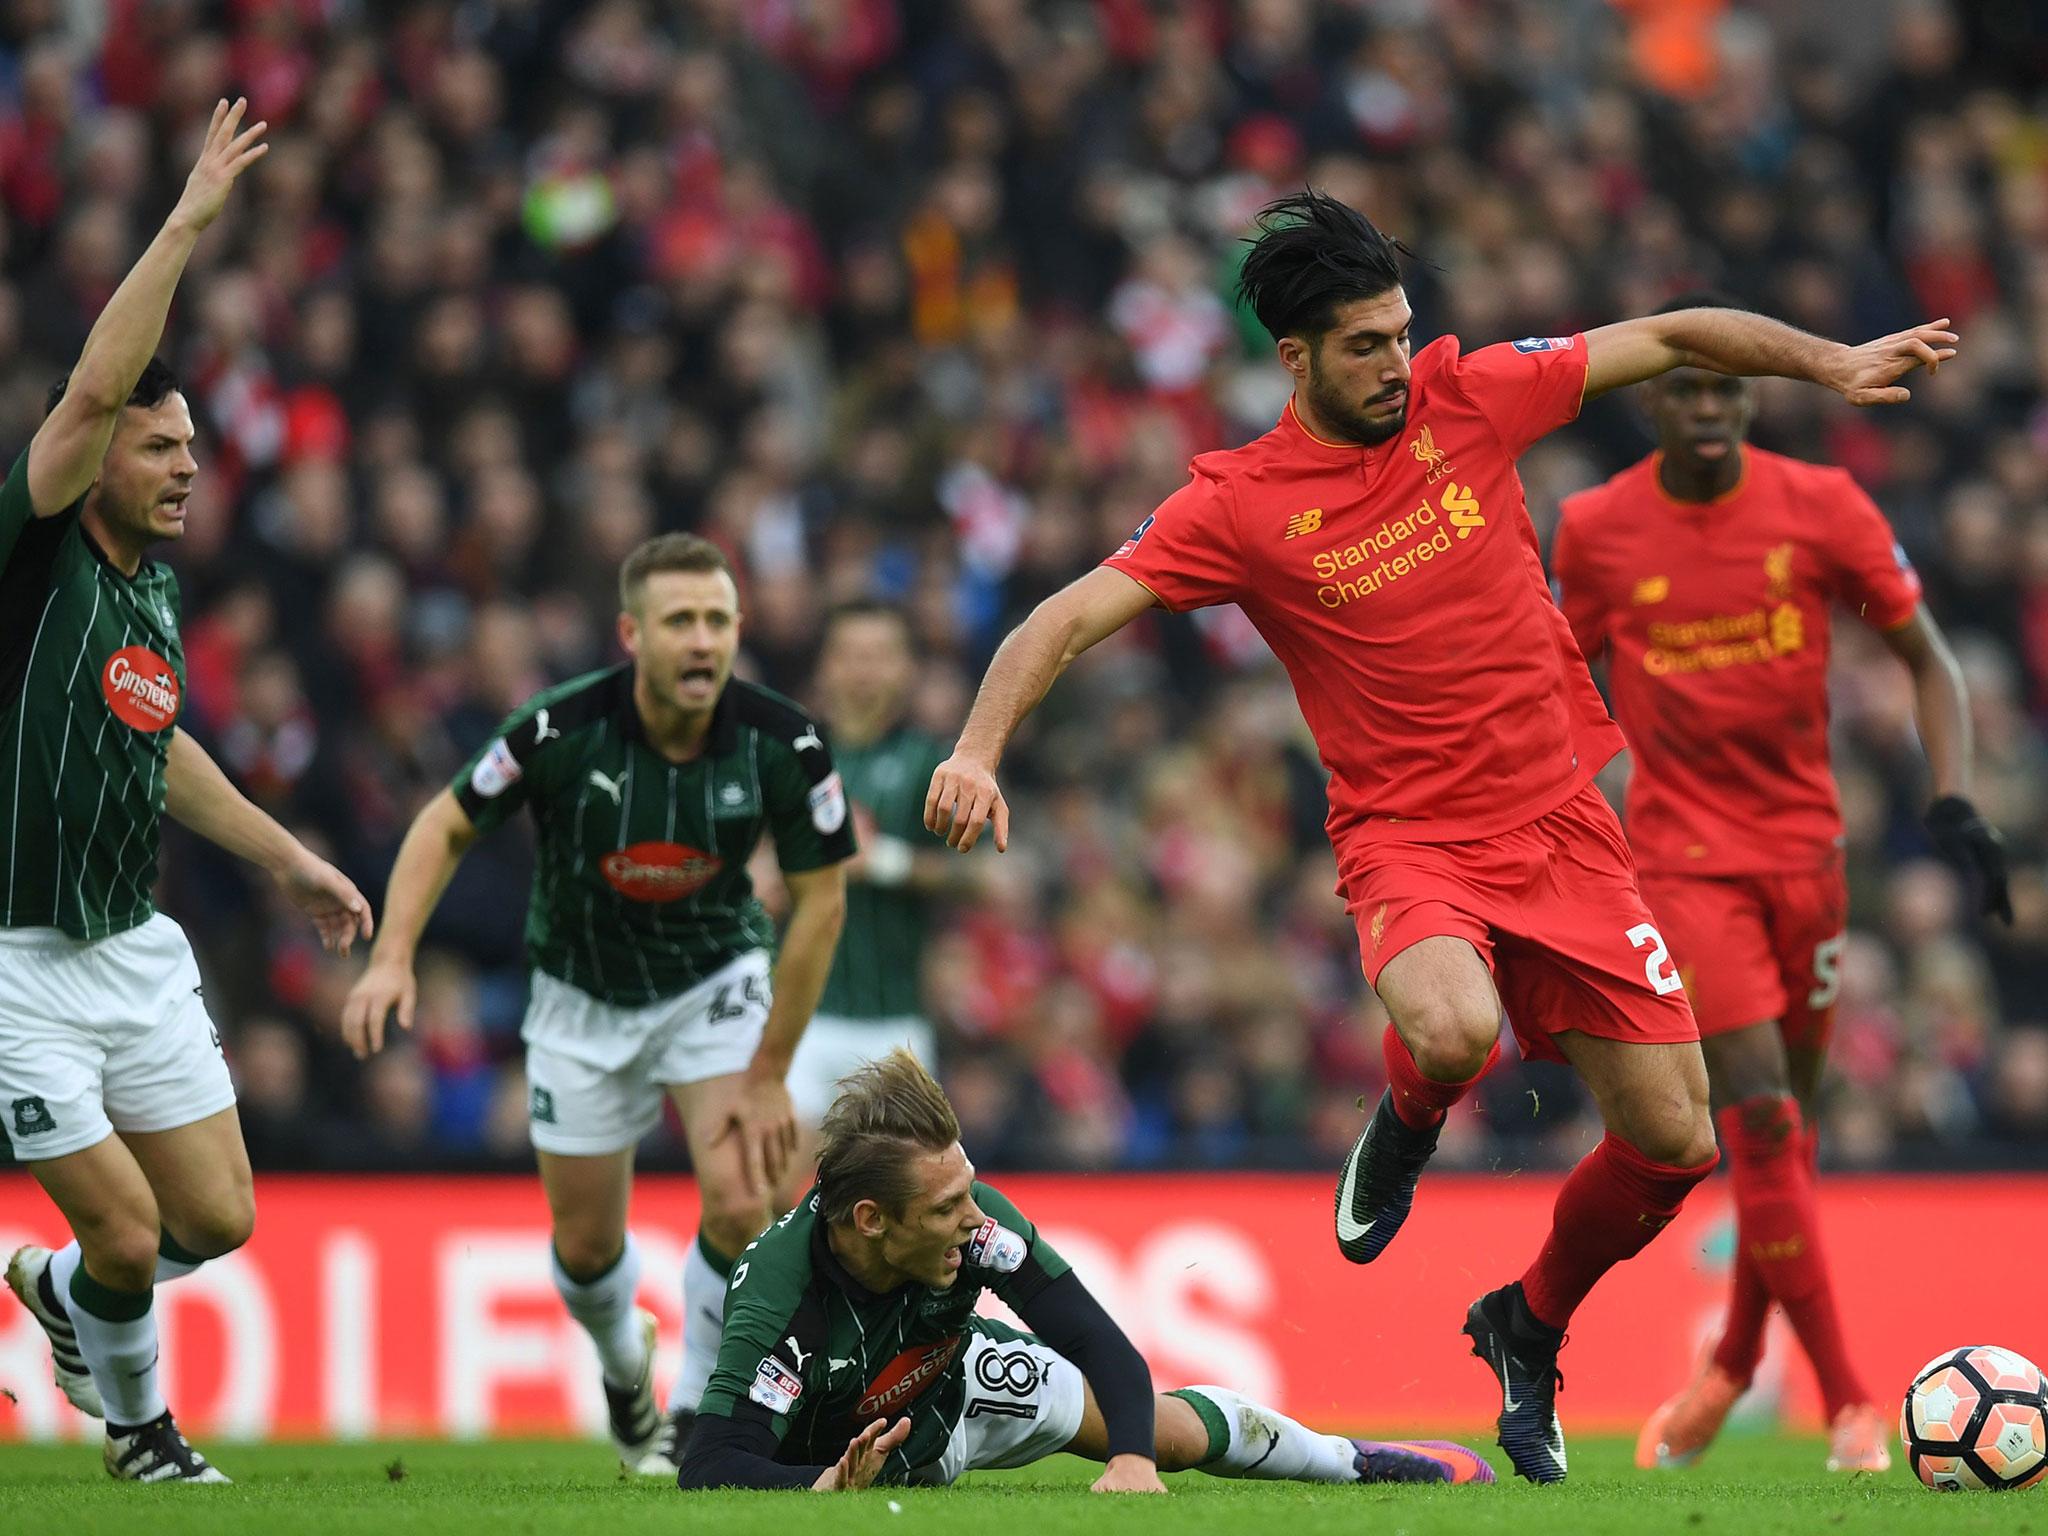 Emre Can grabs hold of possession for Liverpool (Getty)